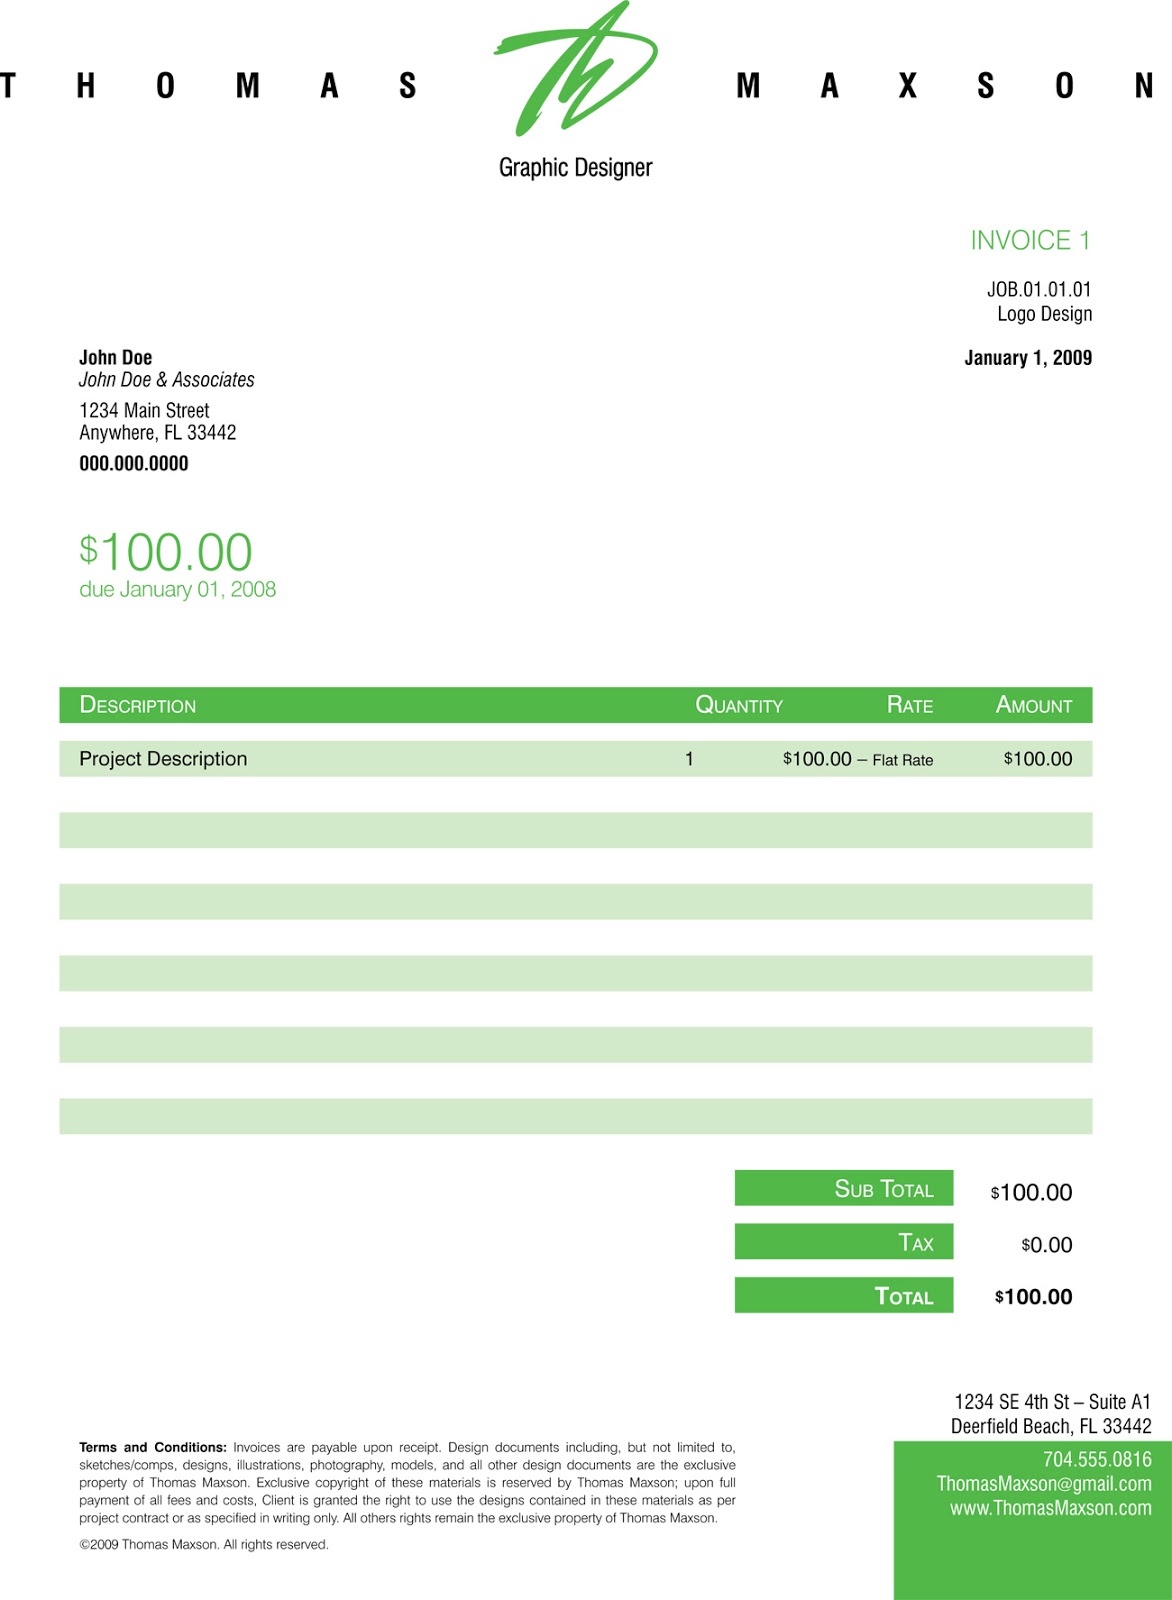 Freelance Invoice Example Template Excel Invoic Writing A Bill 904 